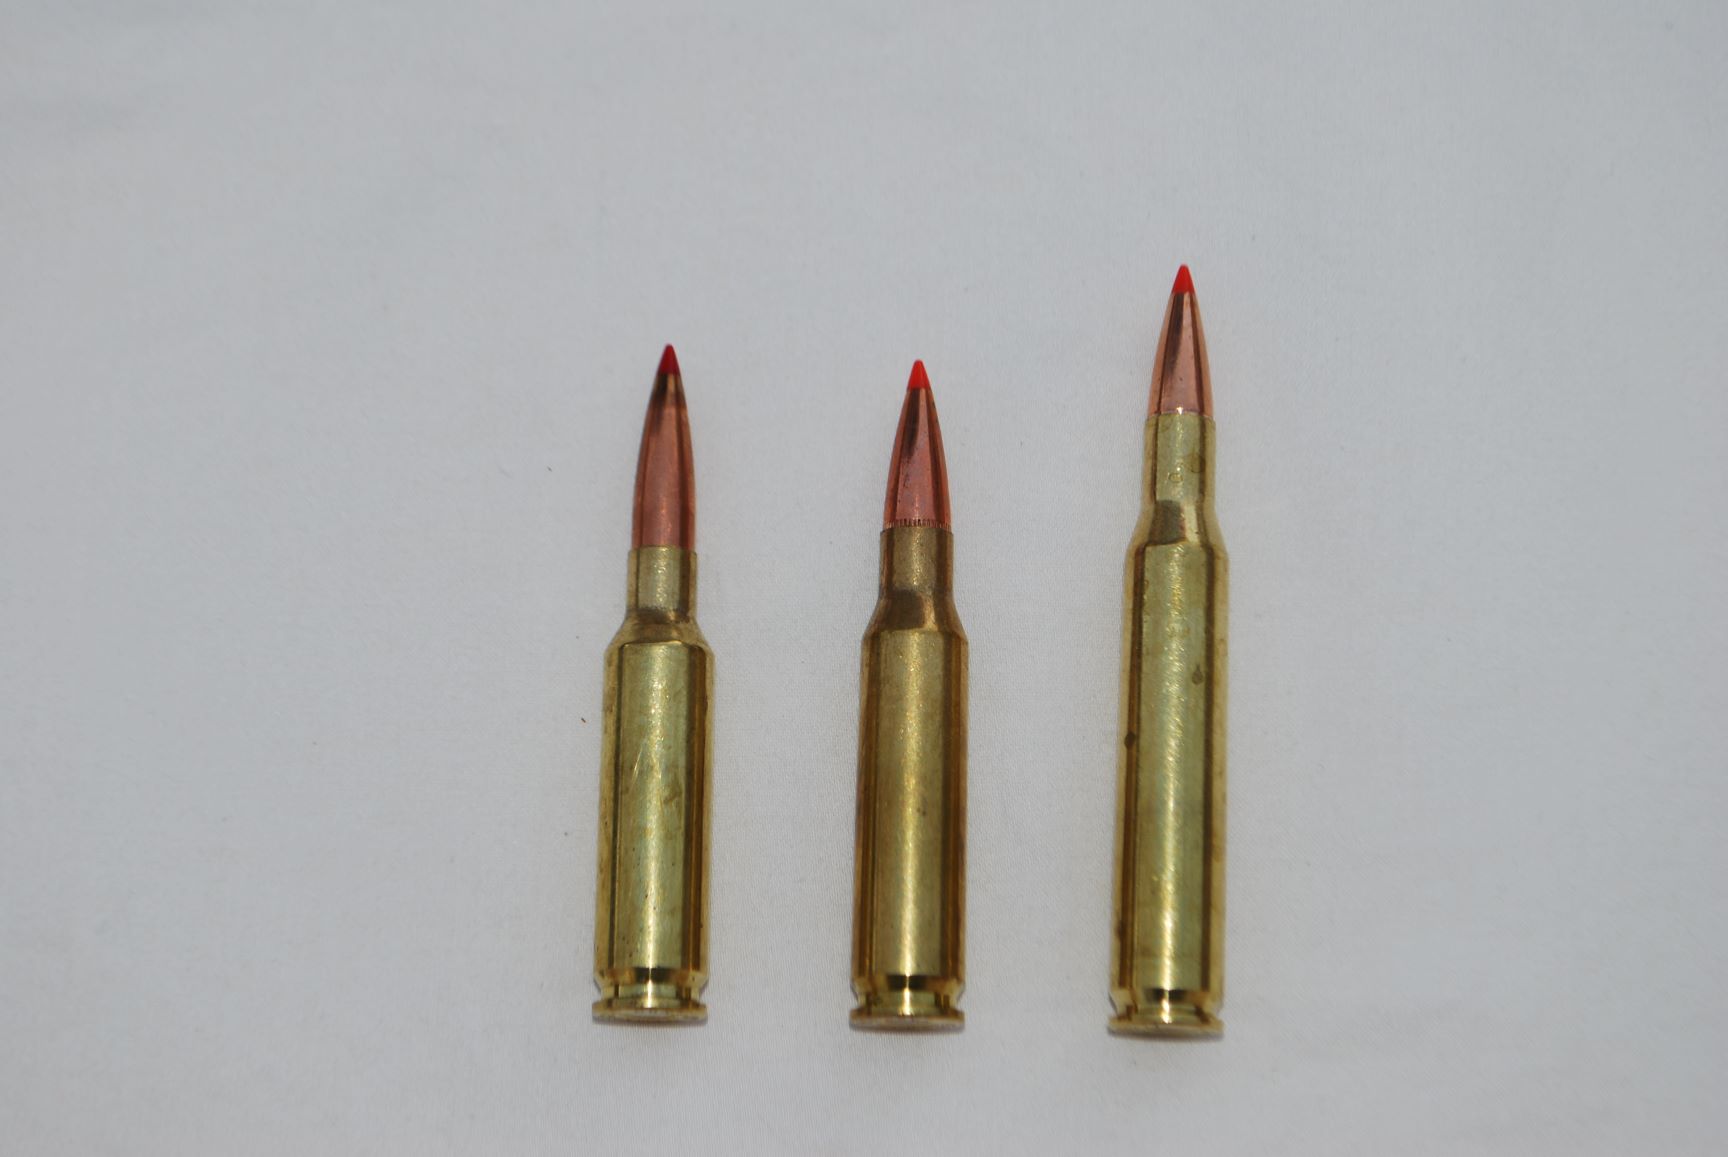 Left to right: 6.5mm Creedmoor, 7mm-08 Remington, .270 Winchester. Although the wildly popular 6.5mm Creedmoor is a better long-range target cartridge, Boddington believes both the 7mm-08 and .270 are better hunting cartridges.